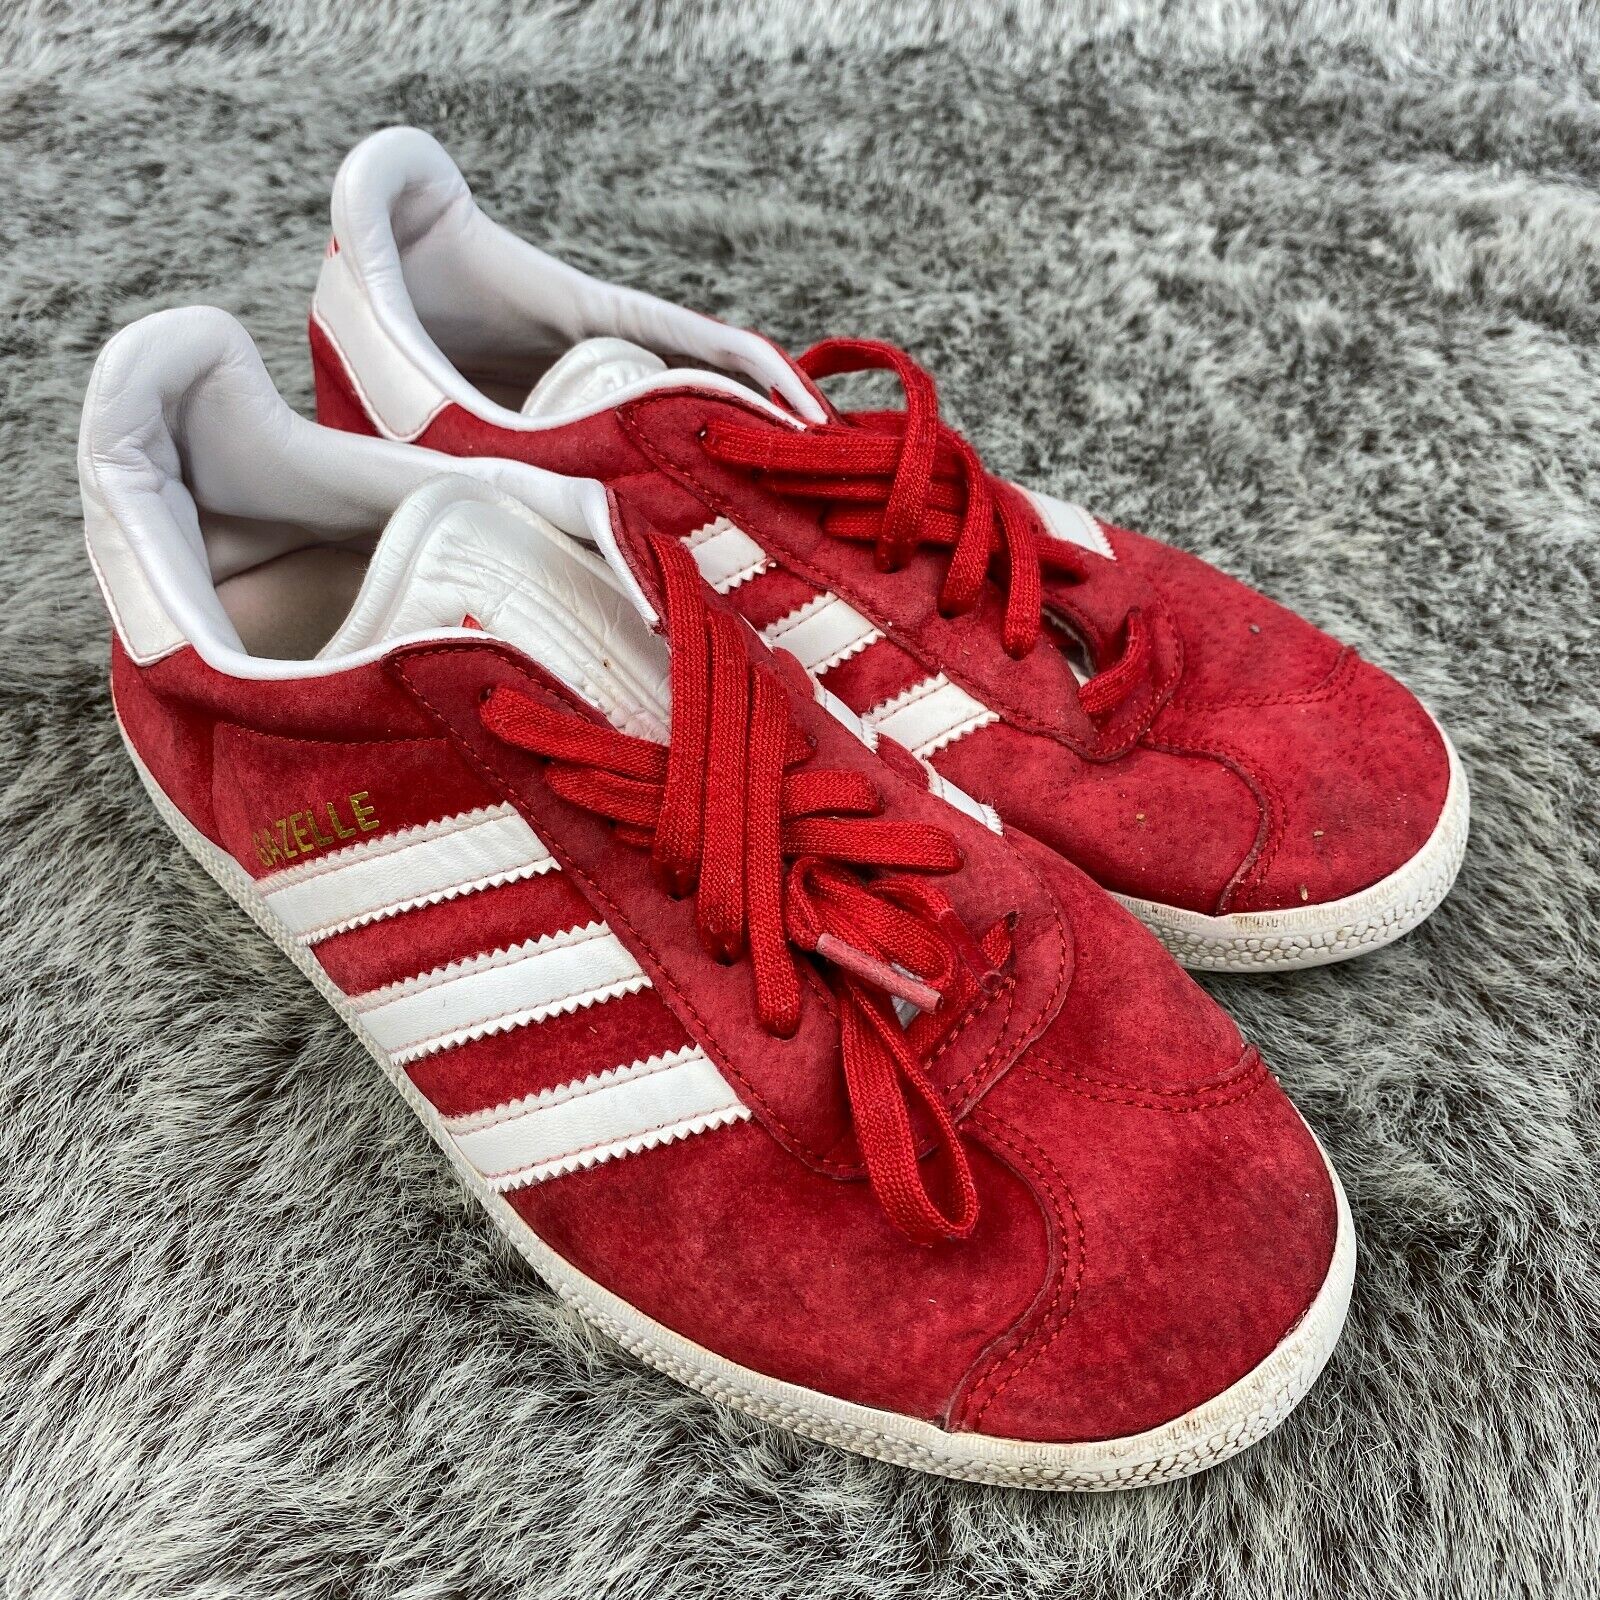 adidas Gazelle J SNEAKERS Suede Laces Leather Scarlet White BY9543 ...